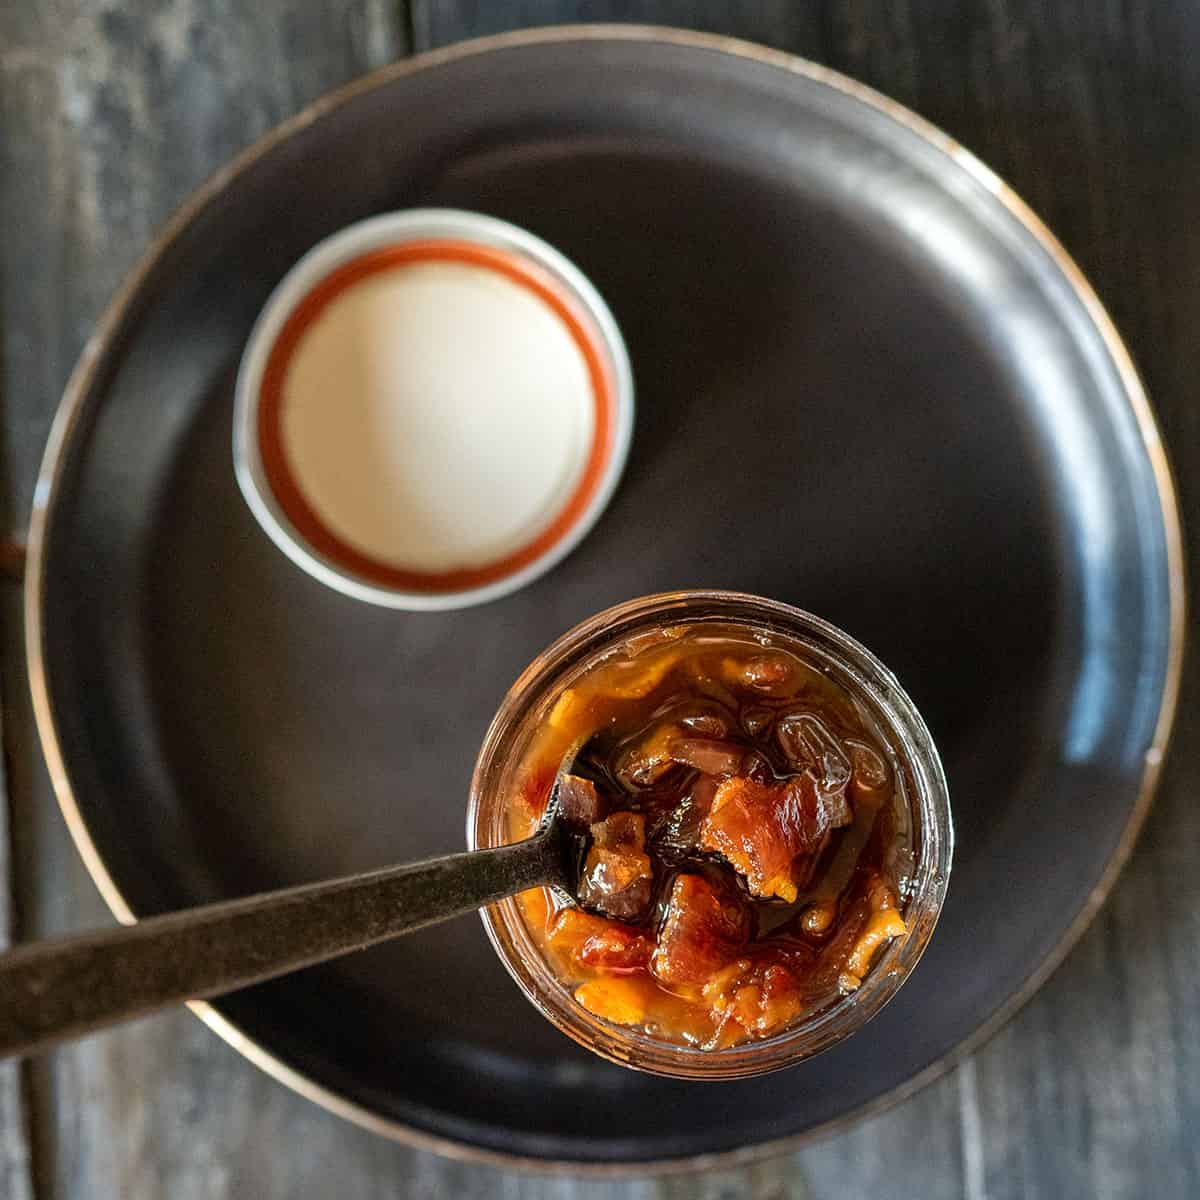 spoonful of bacon jam from jar.